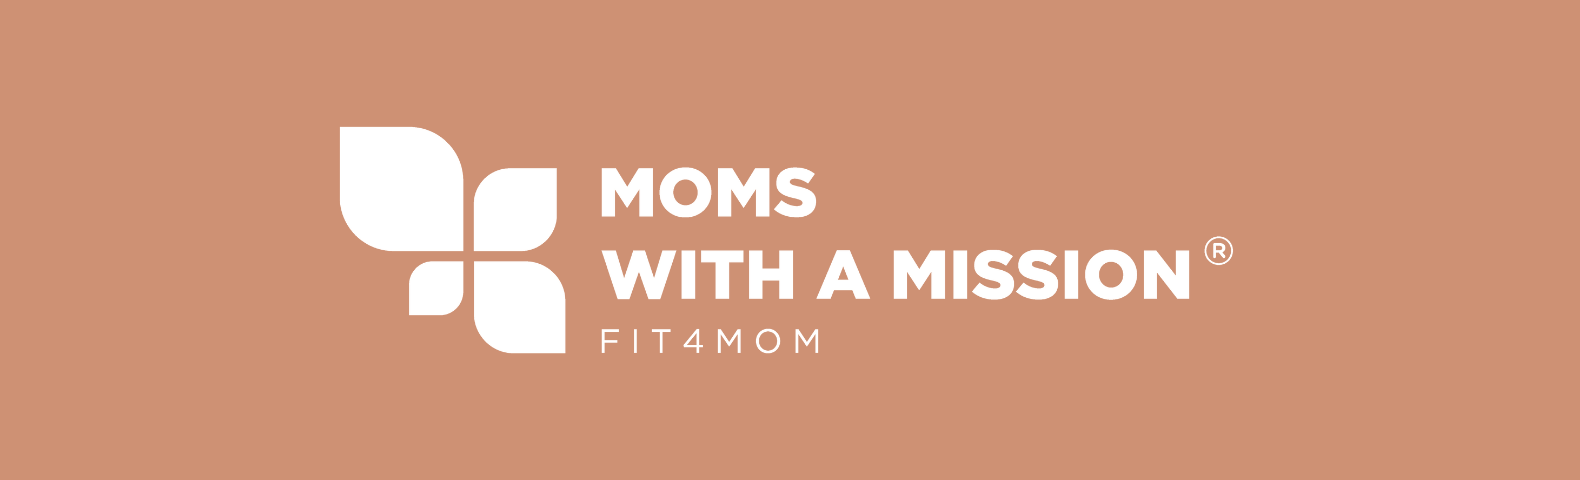 FIT4MOM Moms With A Mission 